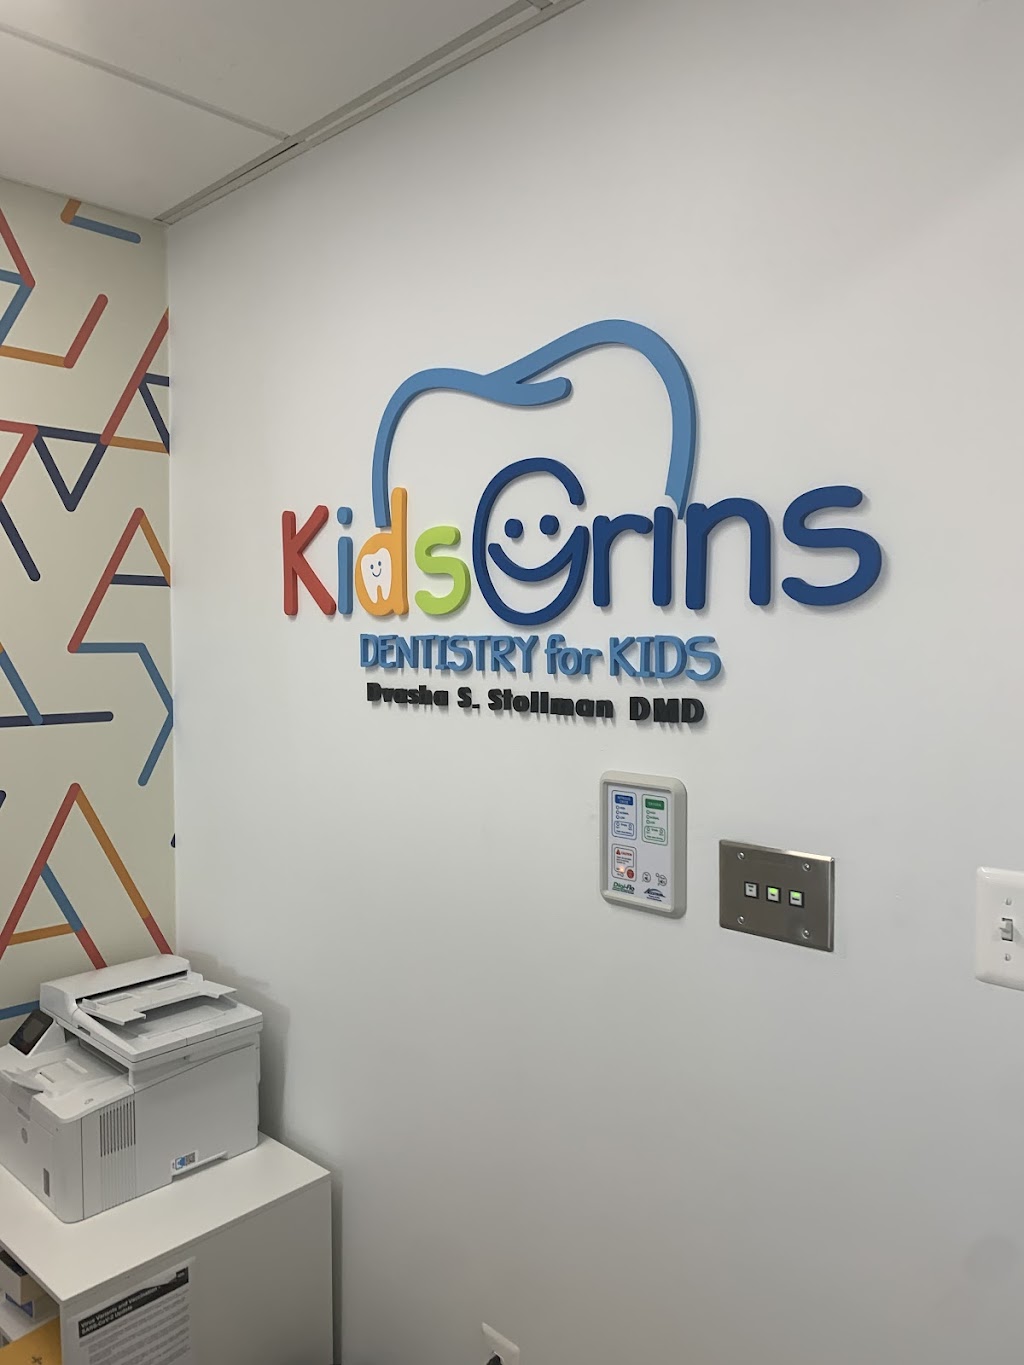 Kids Grins - Dentistry for Kids | 301 West Chester Pike Suites 103-104, Havertown, PA 19083 | Phone: (484) 451-8800